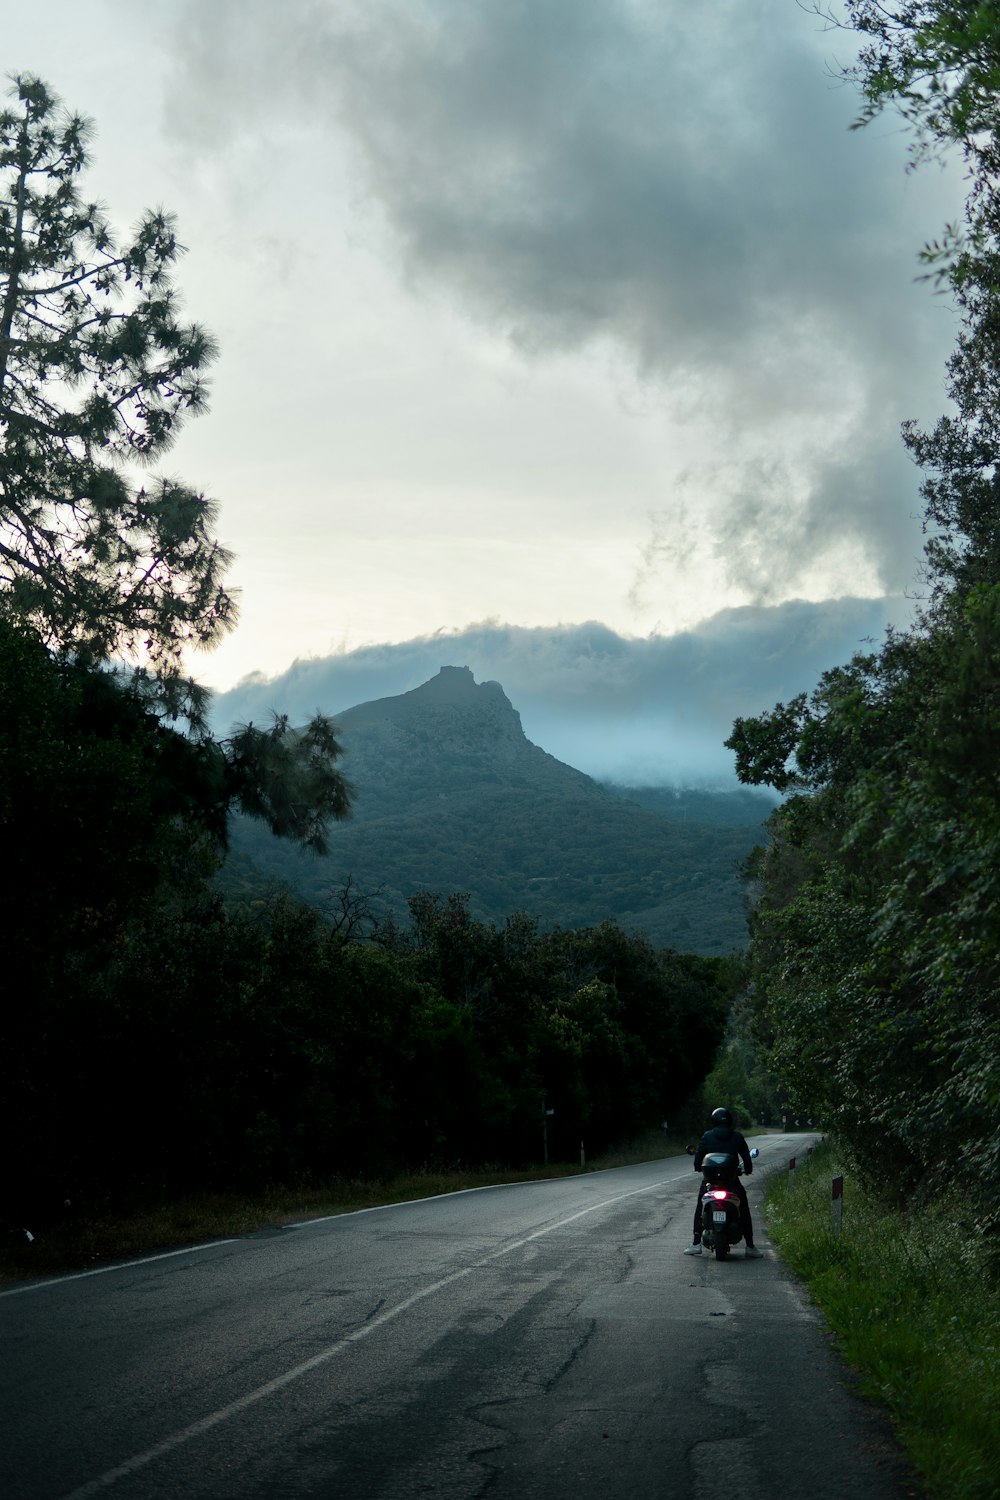 a person riding a motorcycle on a road with trees and mountains in the background